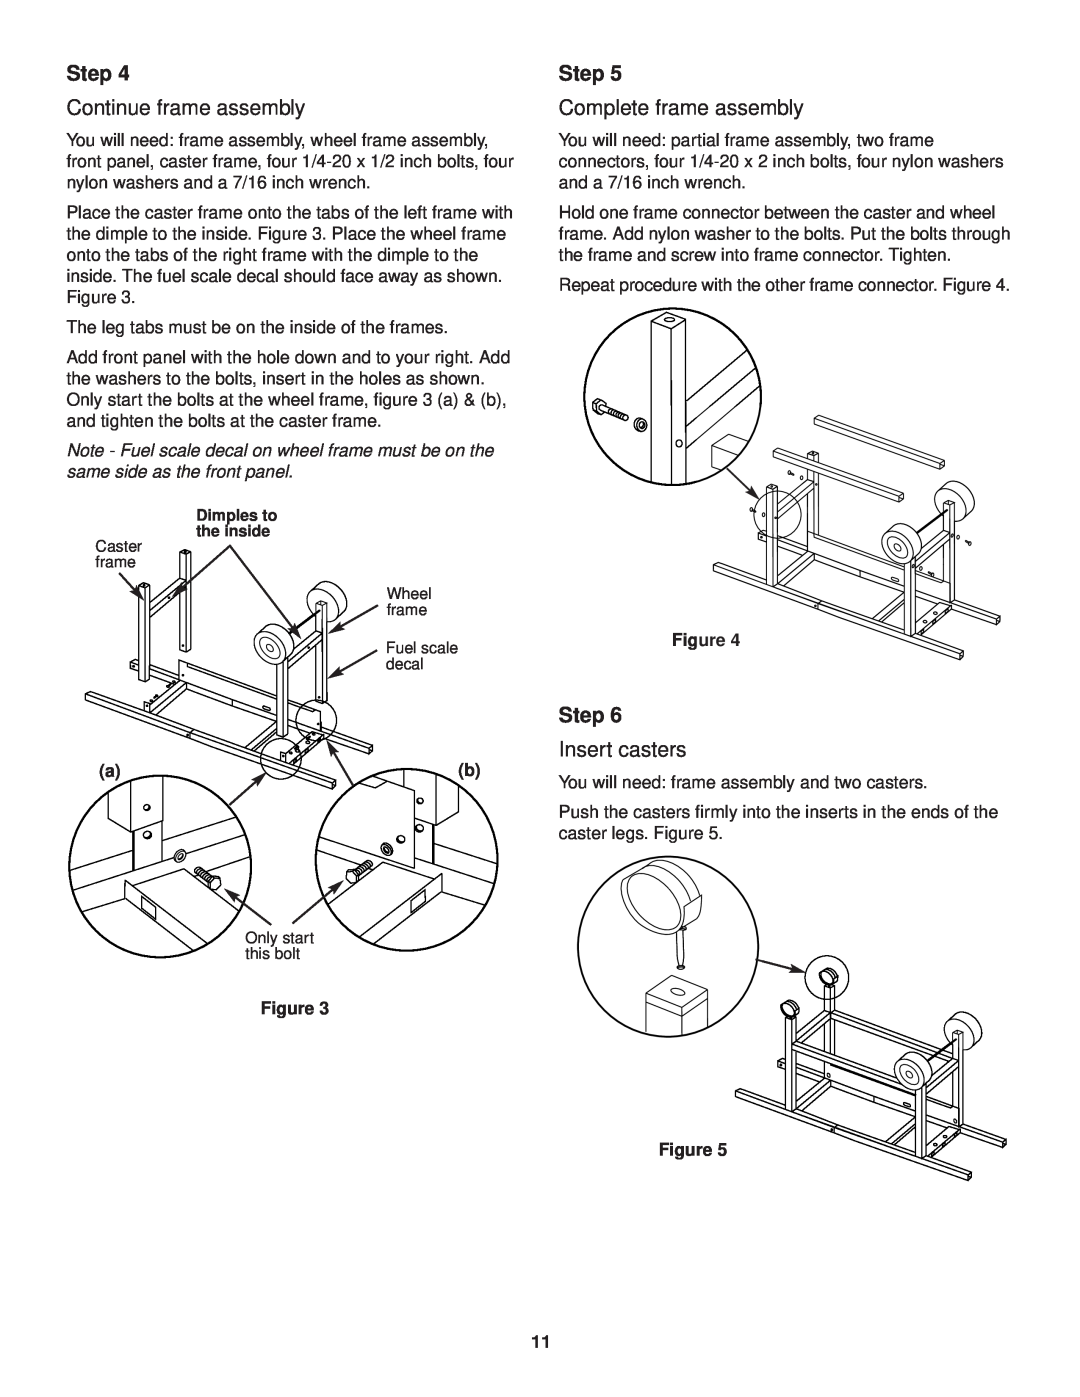 Weber 3000 owner manual Step, Continue frame assembly, Complete frame assembly, Insert casters 